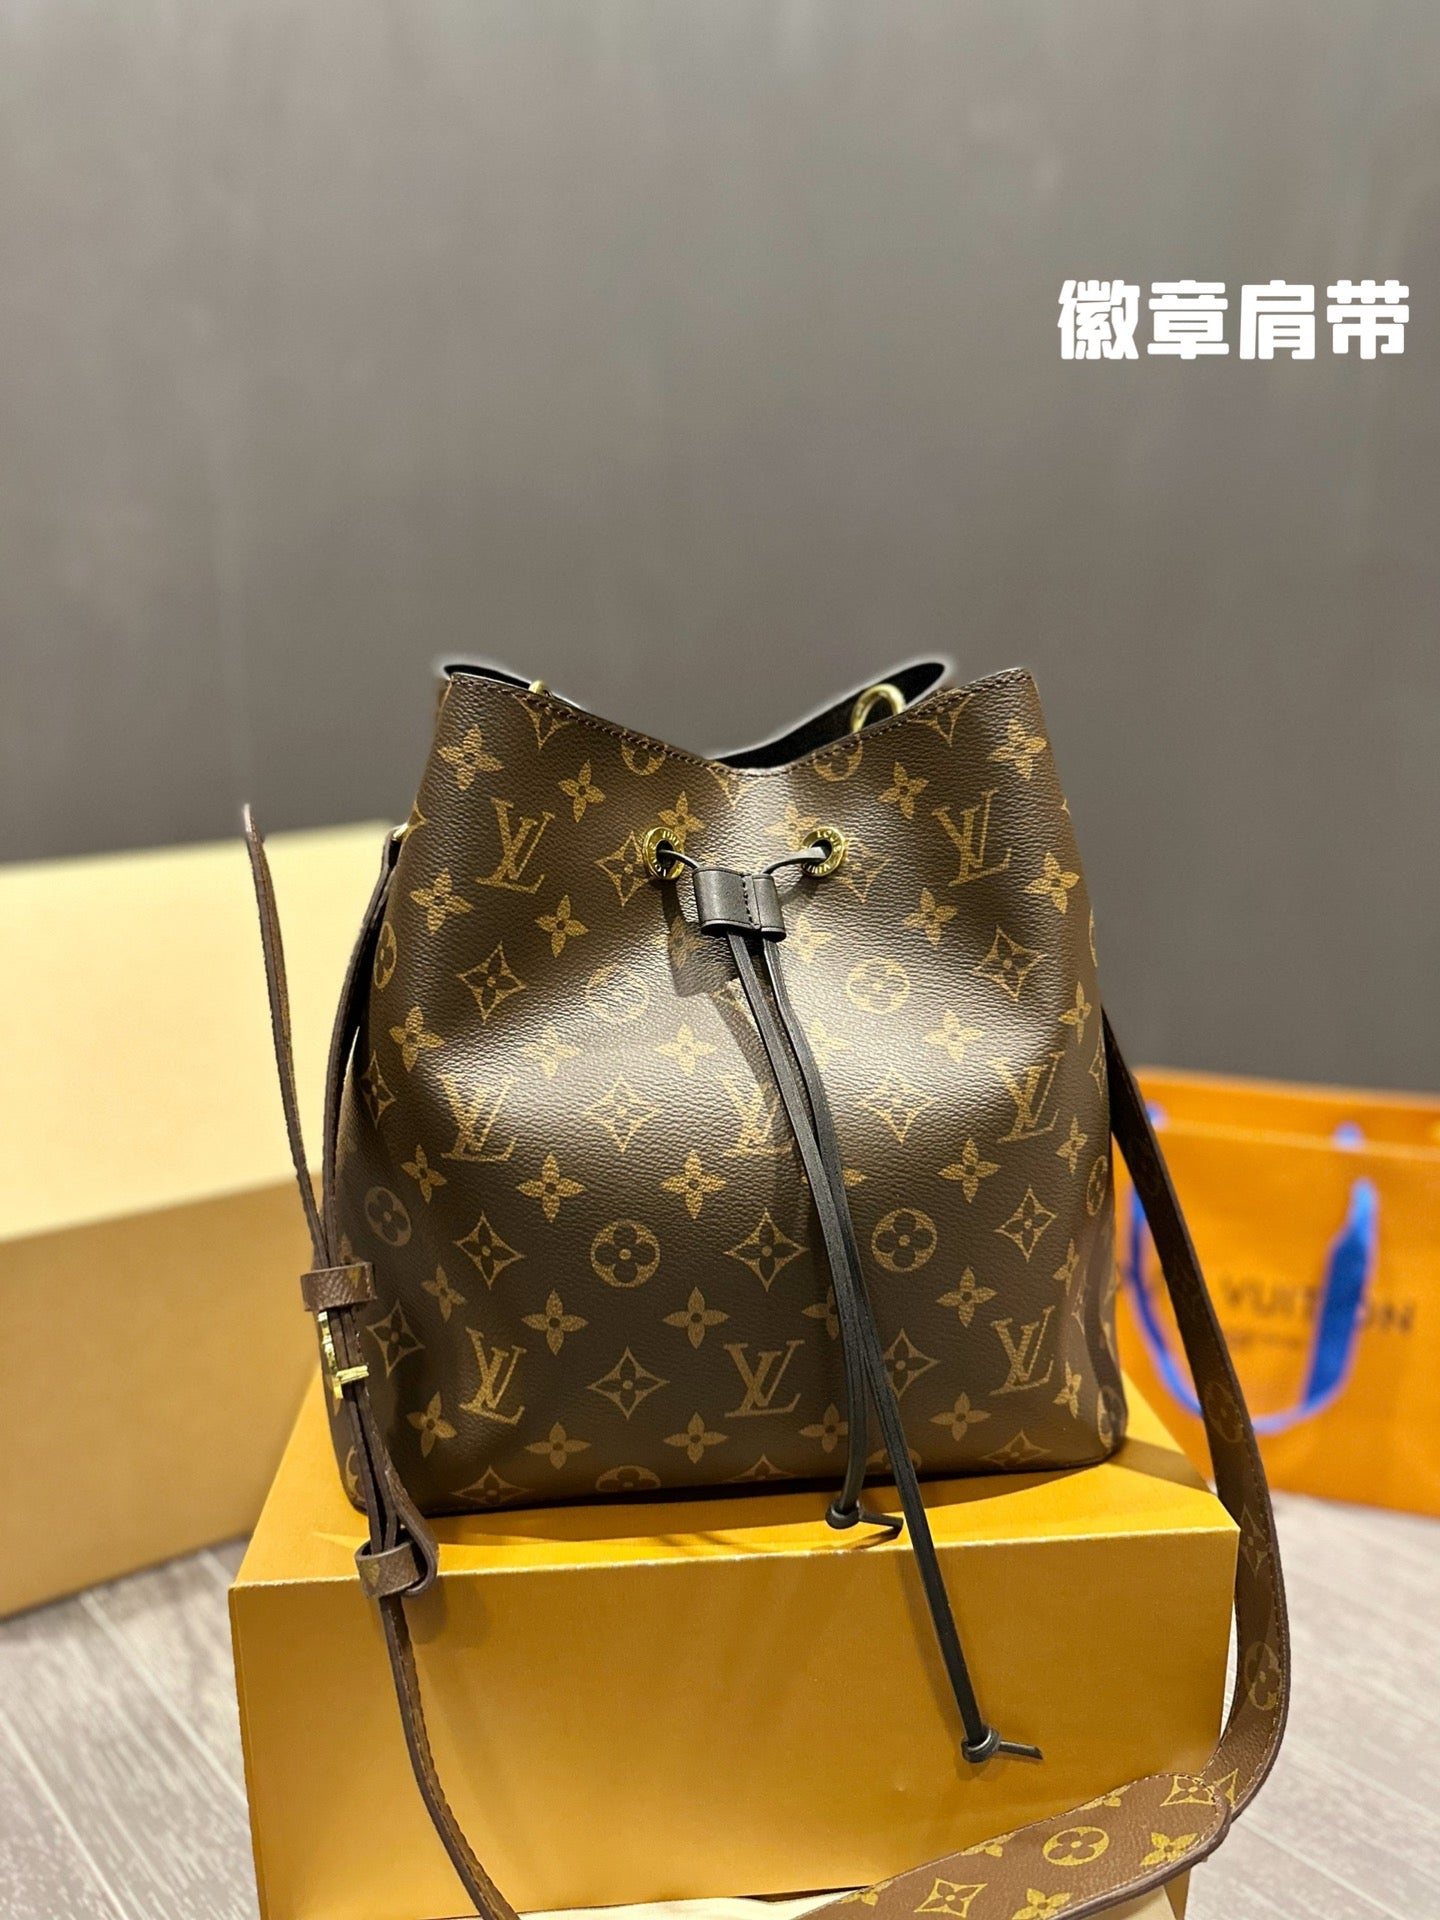 Pre-Order from China – Onlykikaybox